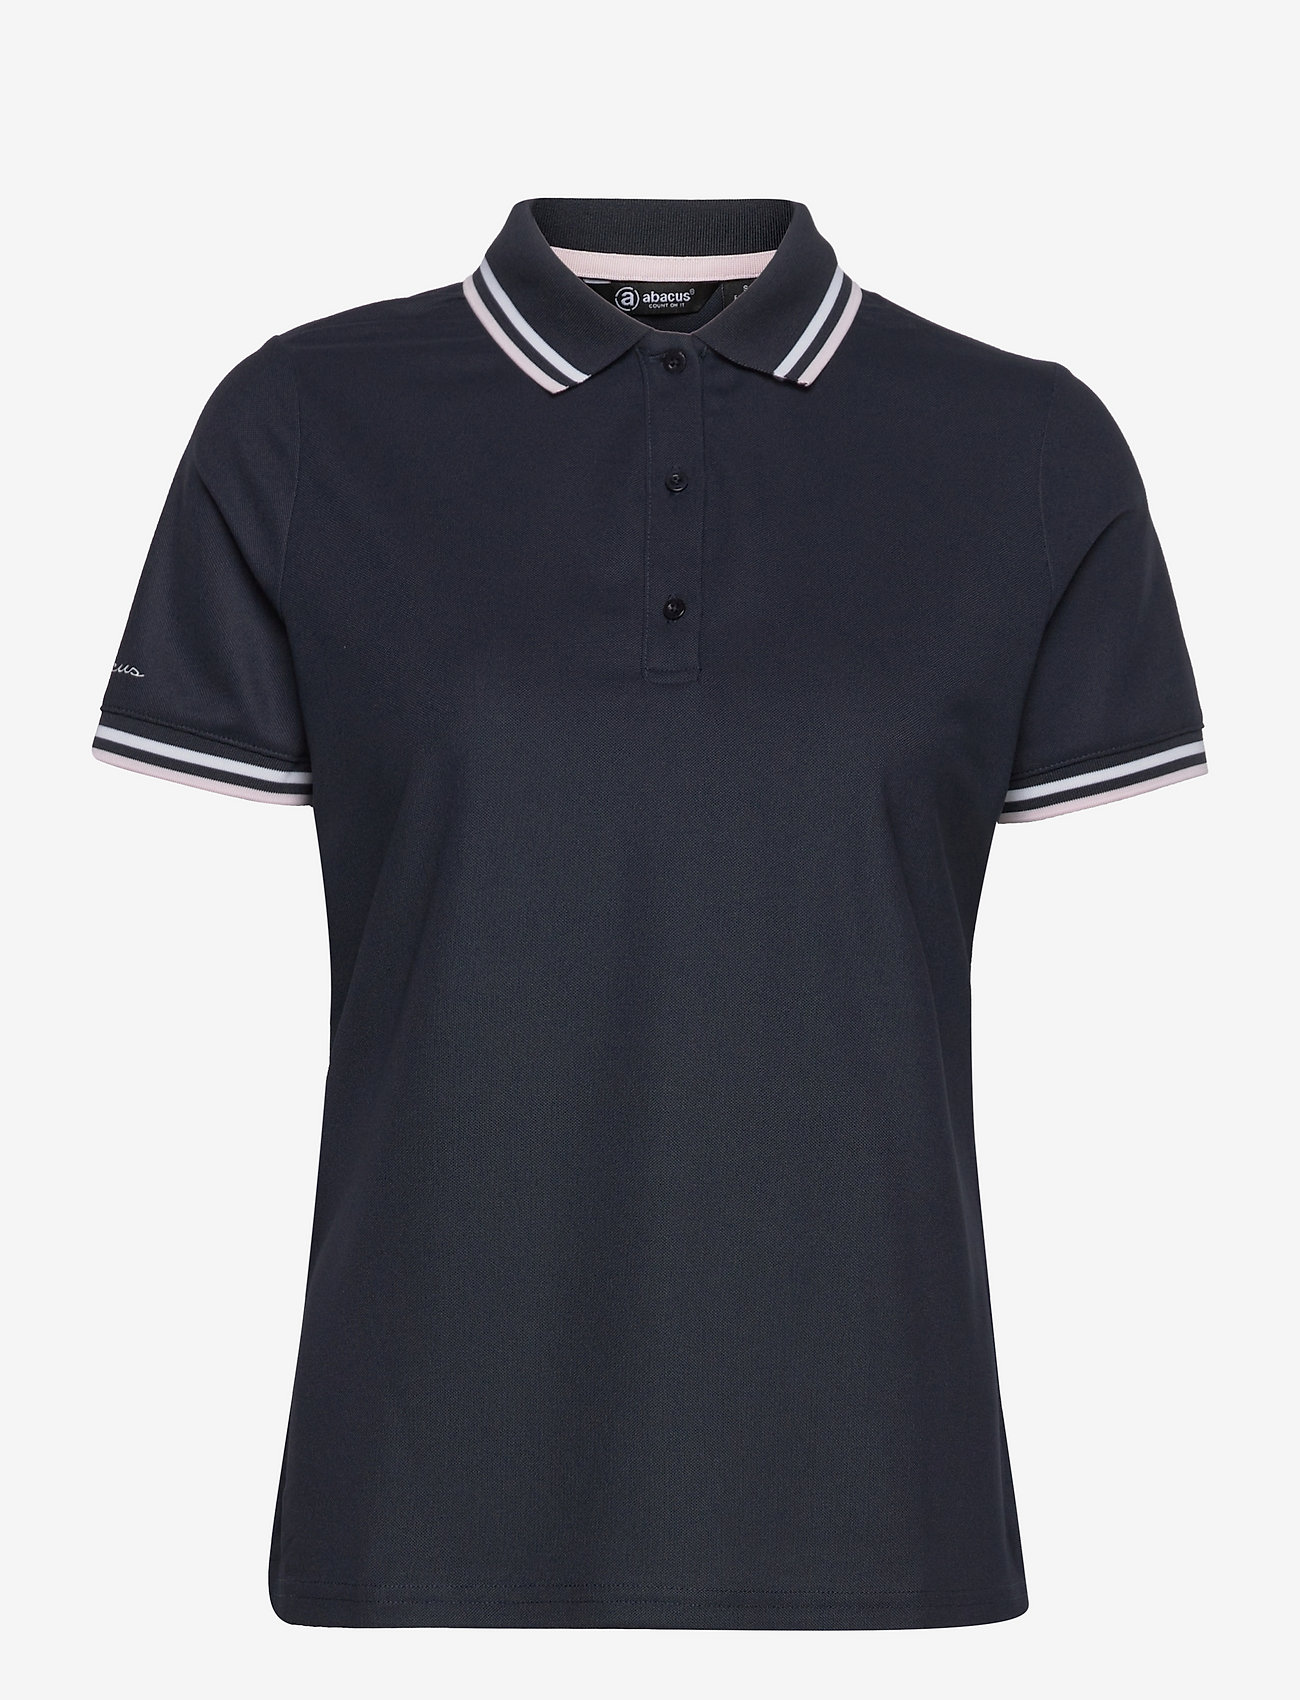 Abacus - Lds Pines polo - polo's - navy - 0